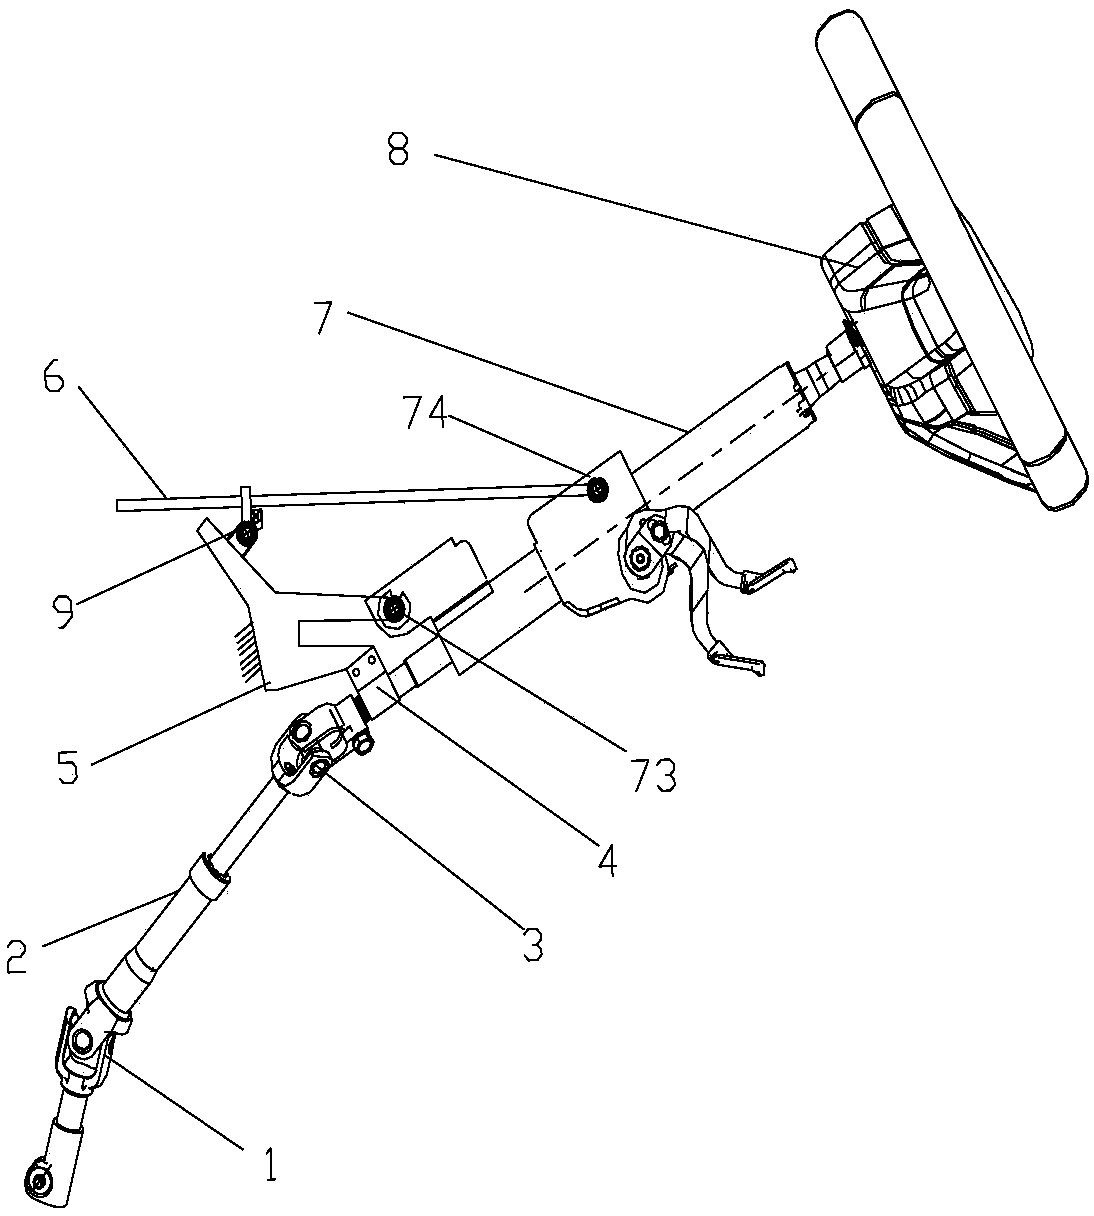 Foldable steering control system